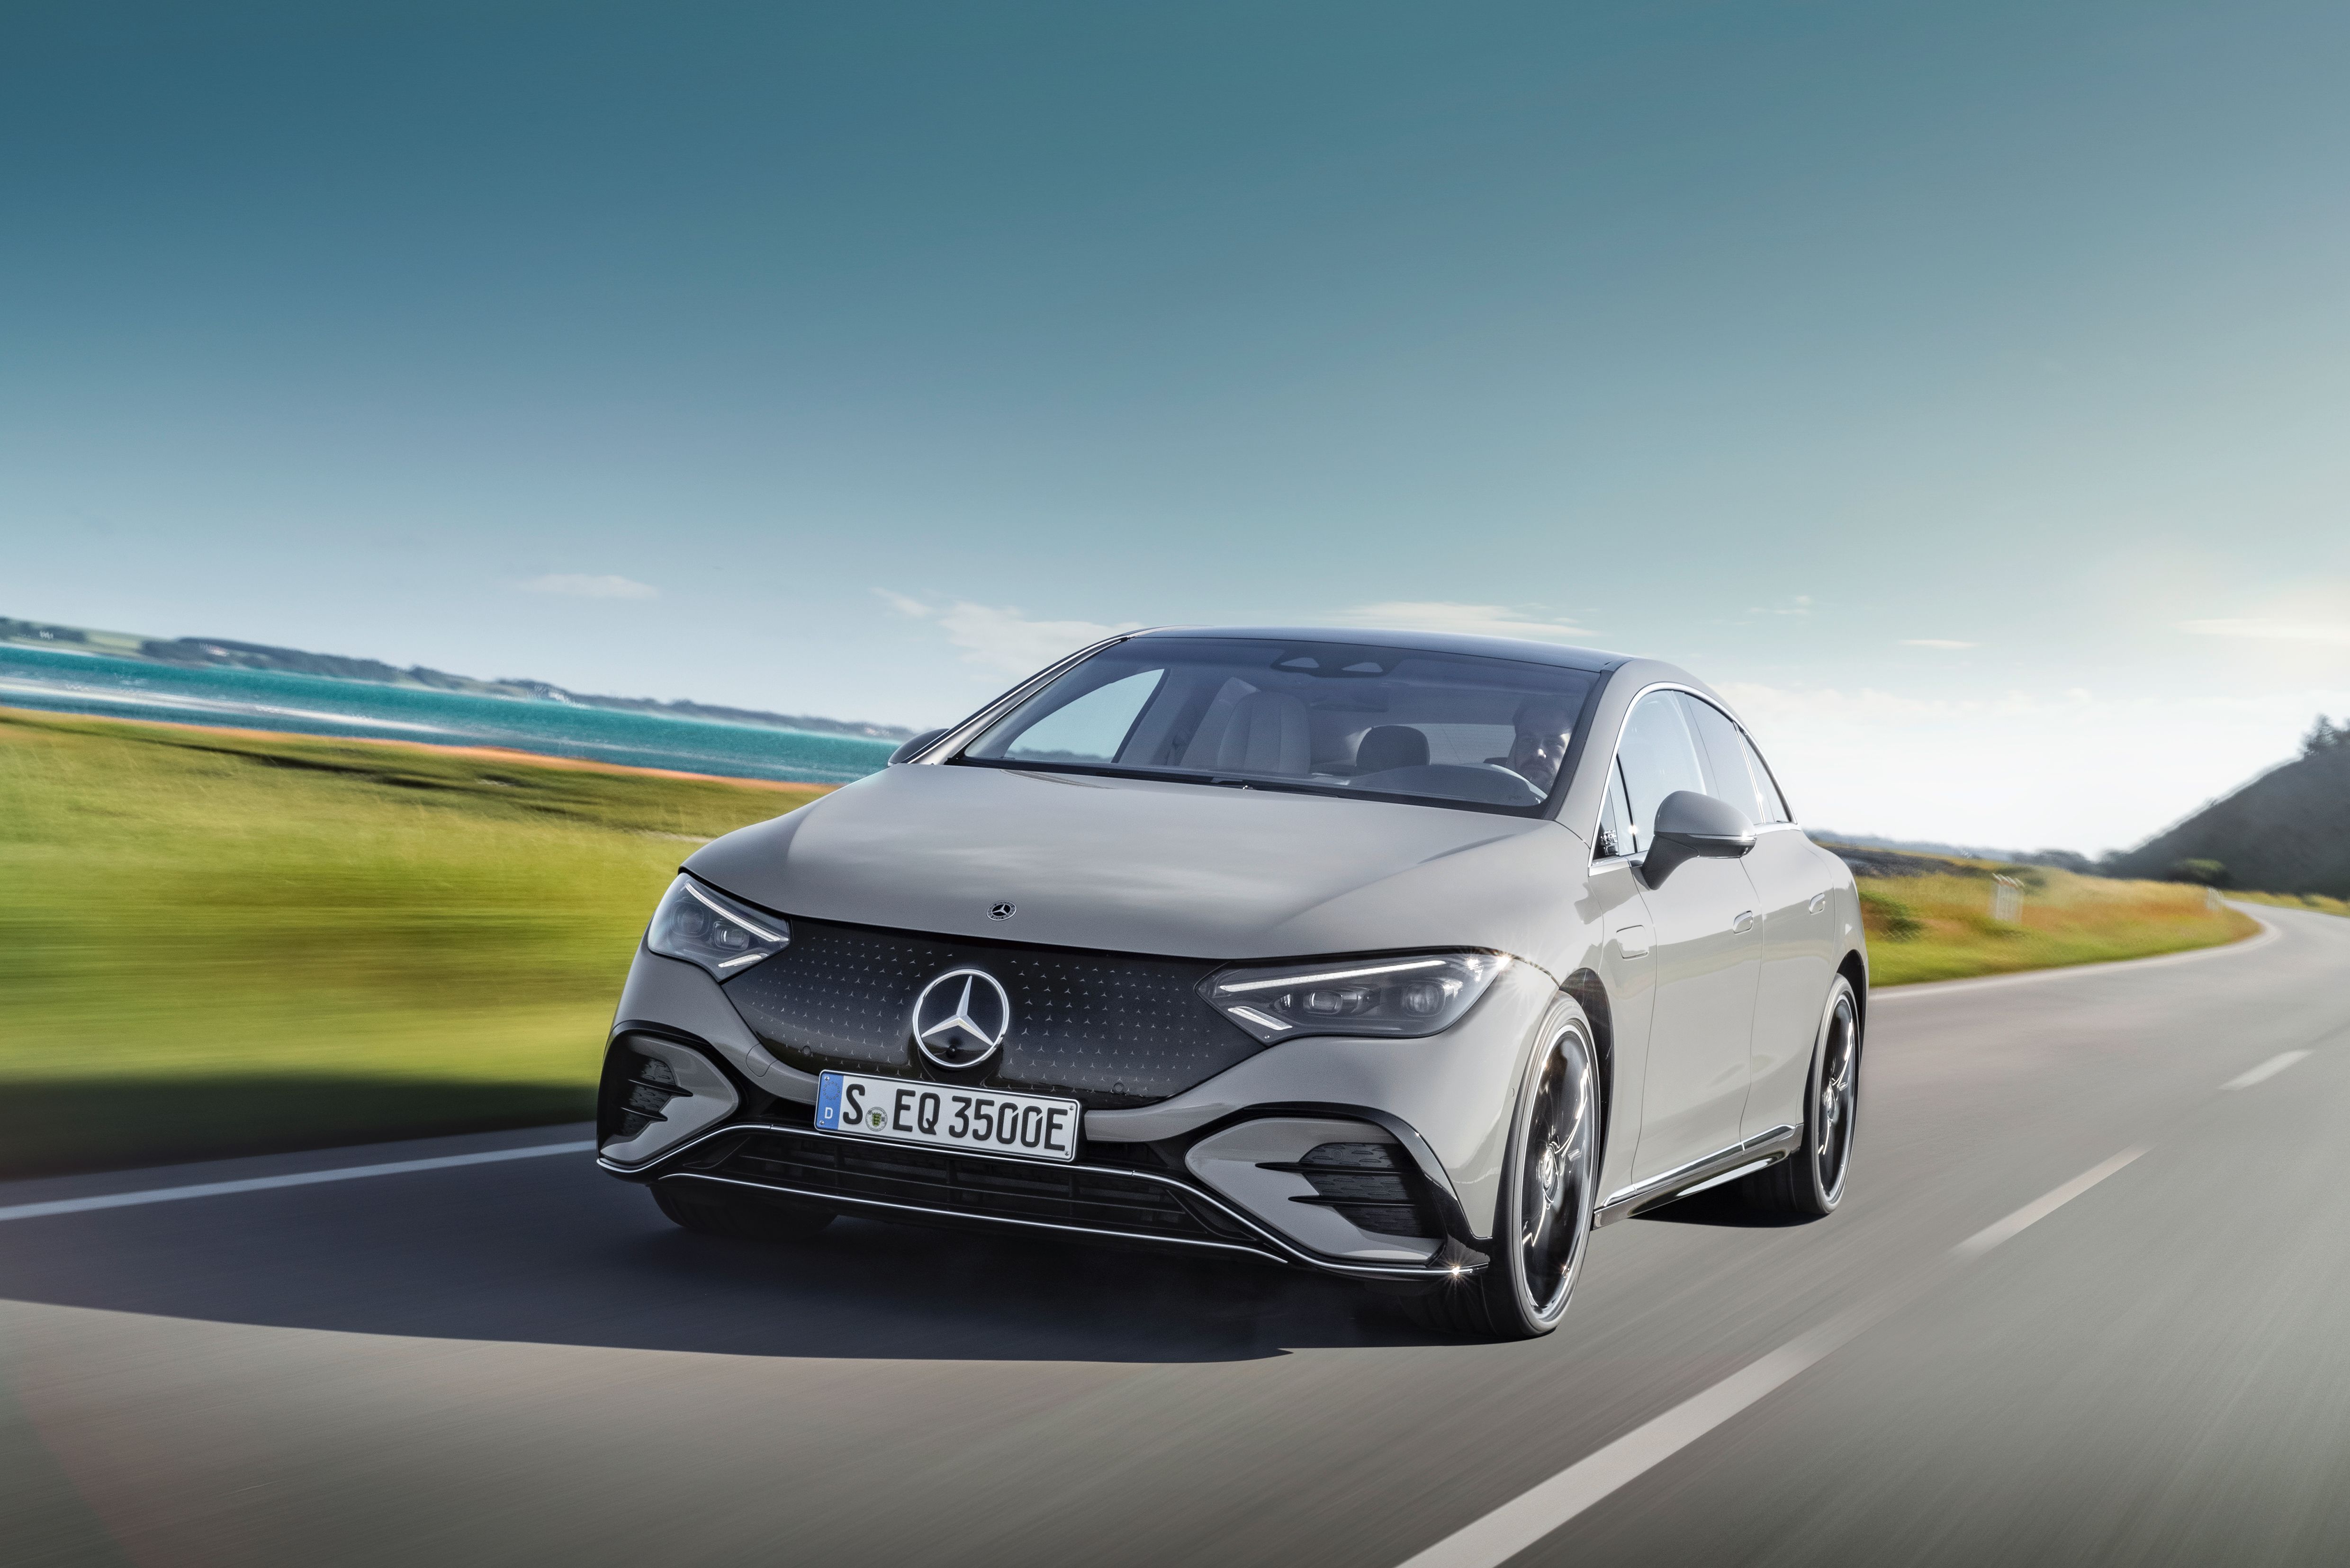 2021 Mercedes-Benz Goes On A Reveal Spree In Munich To Maintain The EV EQ-uilibrium 